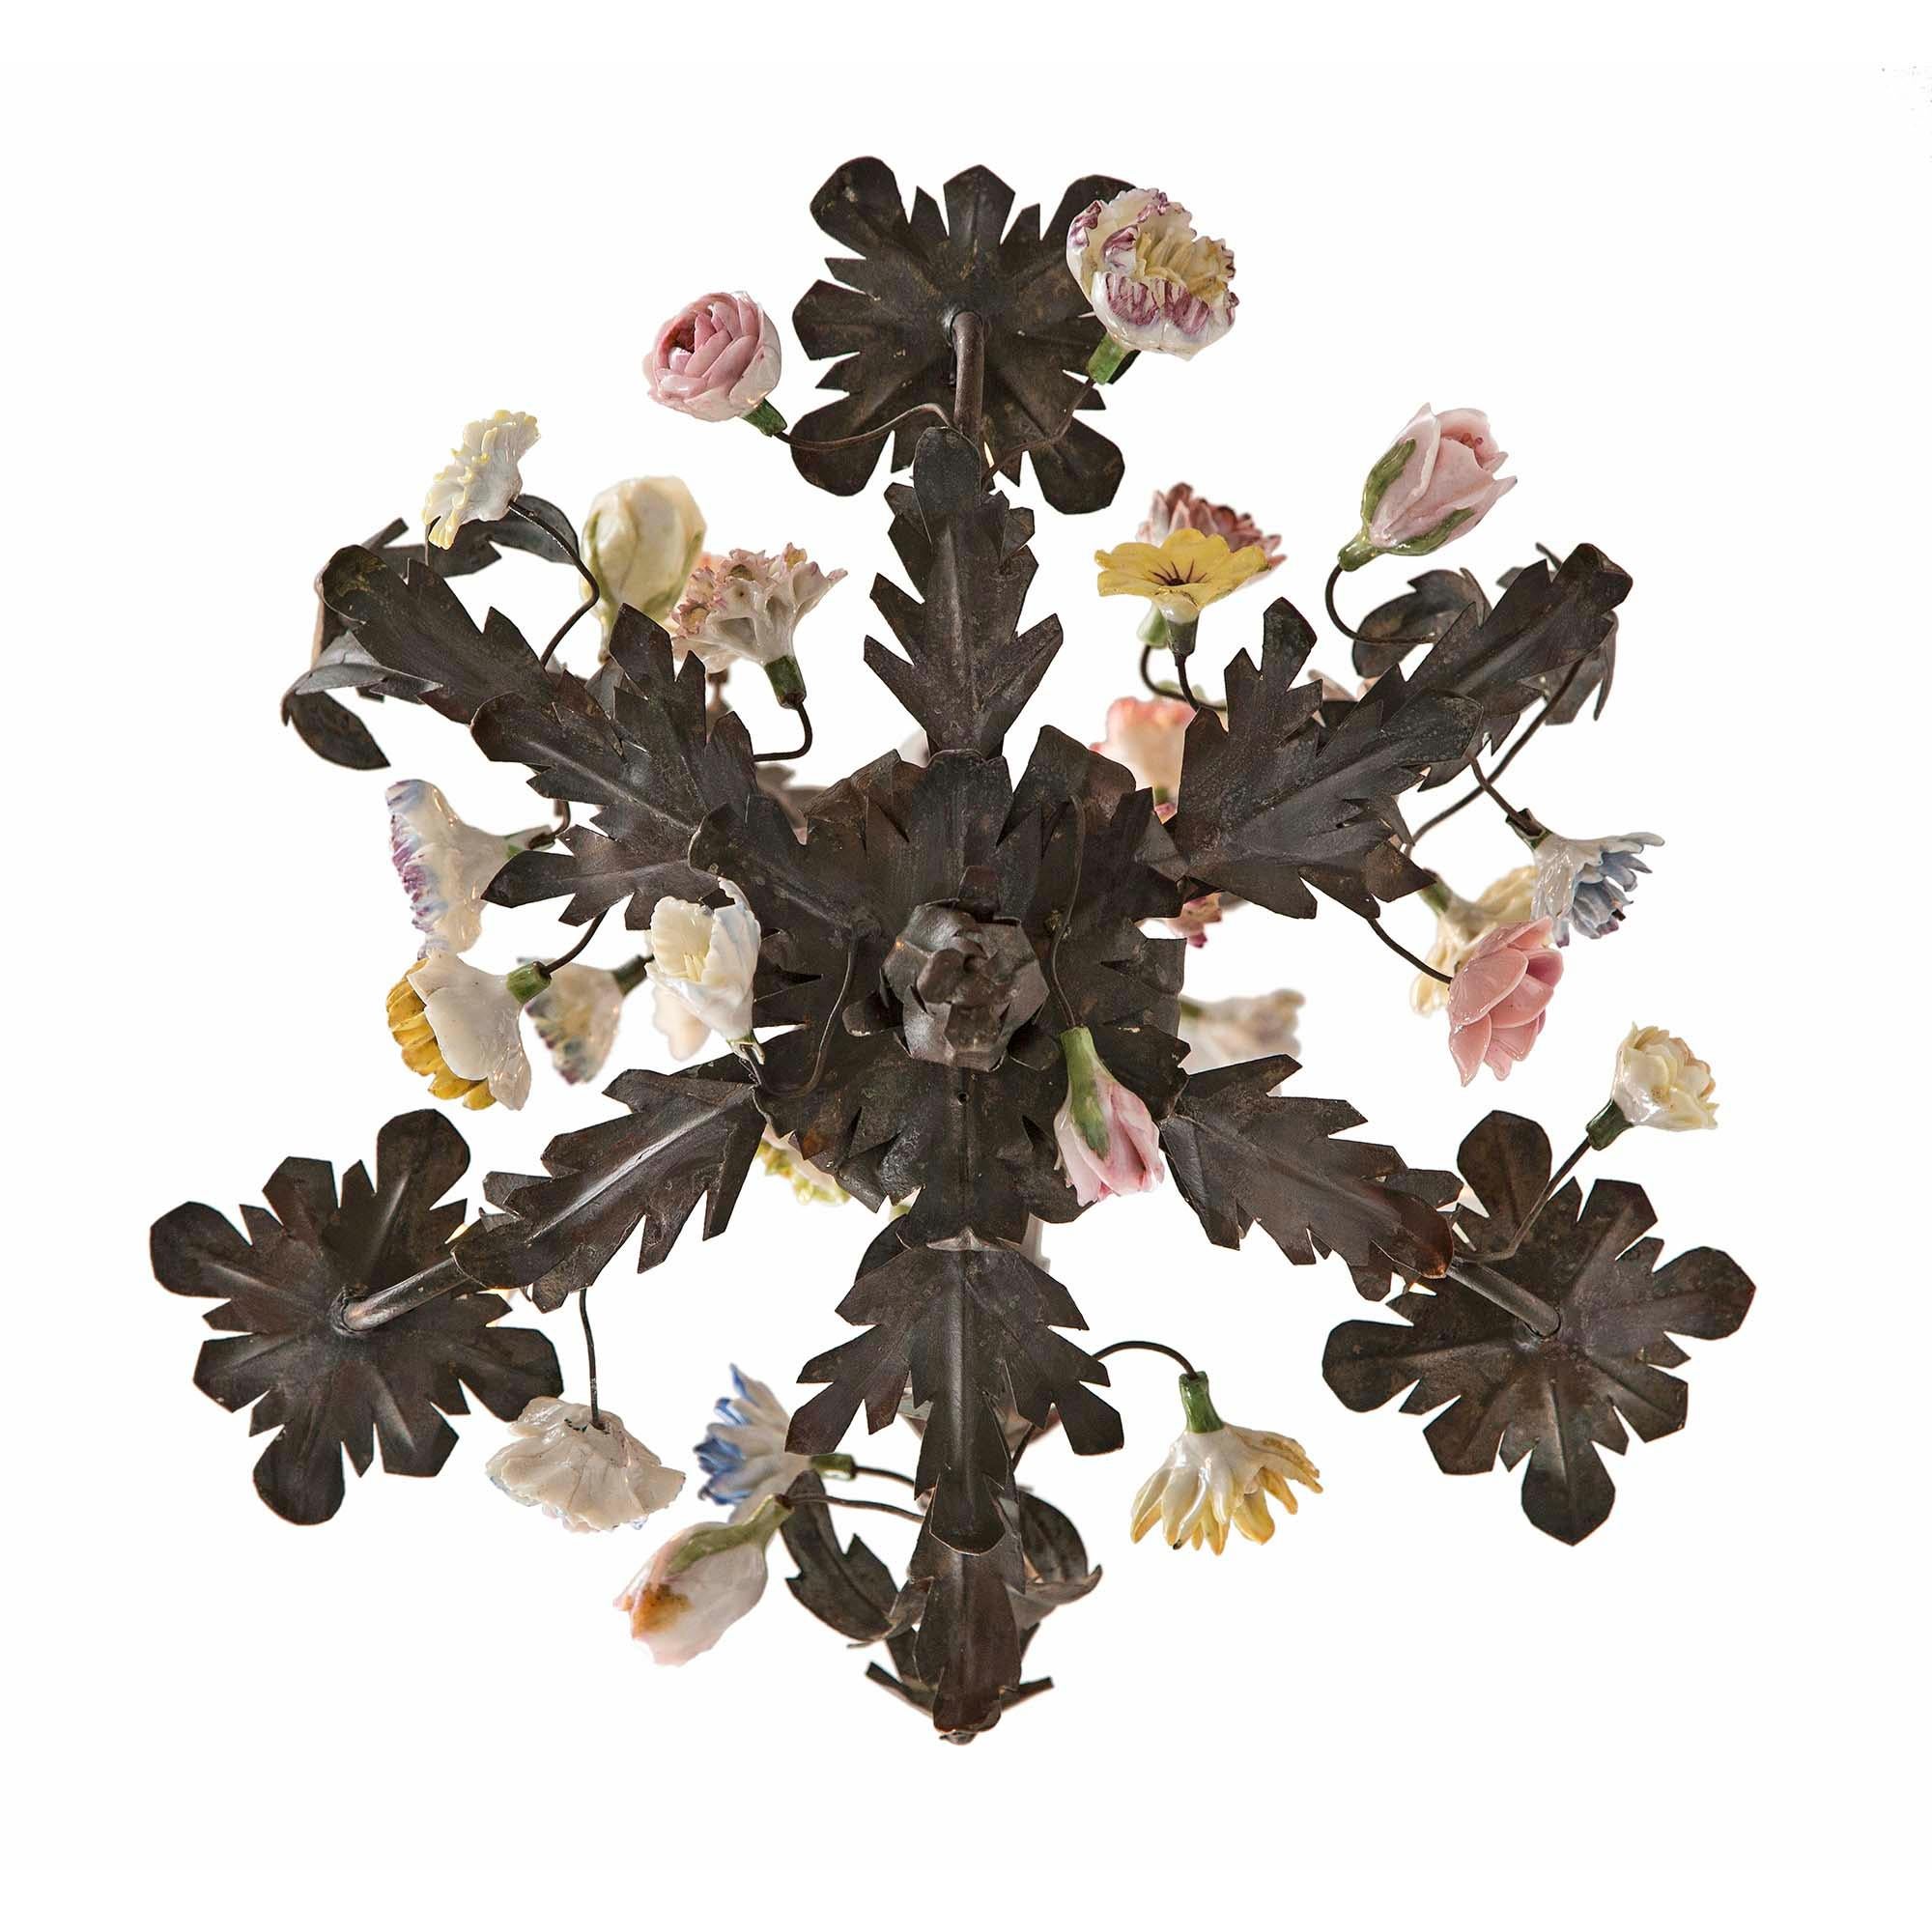 A beautiful and small scale Italian 19th century Louis XVI st. tole and Saxe porcelain three light chandelier. The chandelier is centered by a charming bottom foliate finial amidst extremely well executed and striking colored Saxe porcelain flowers